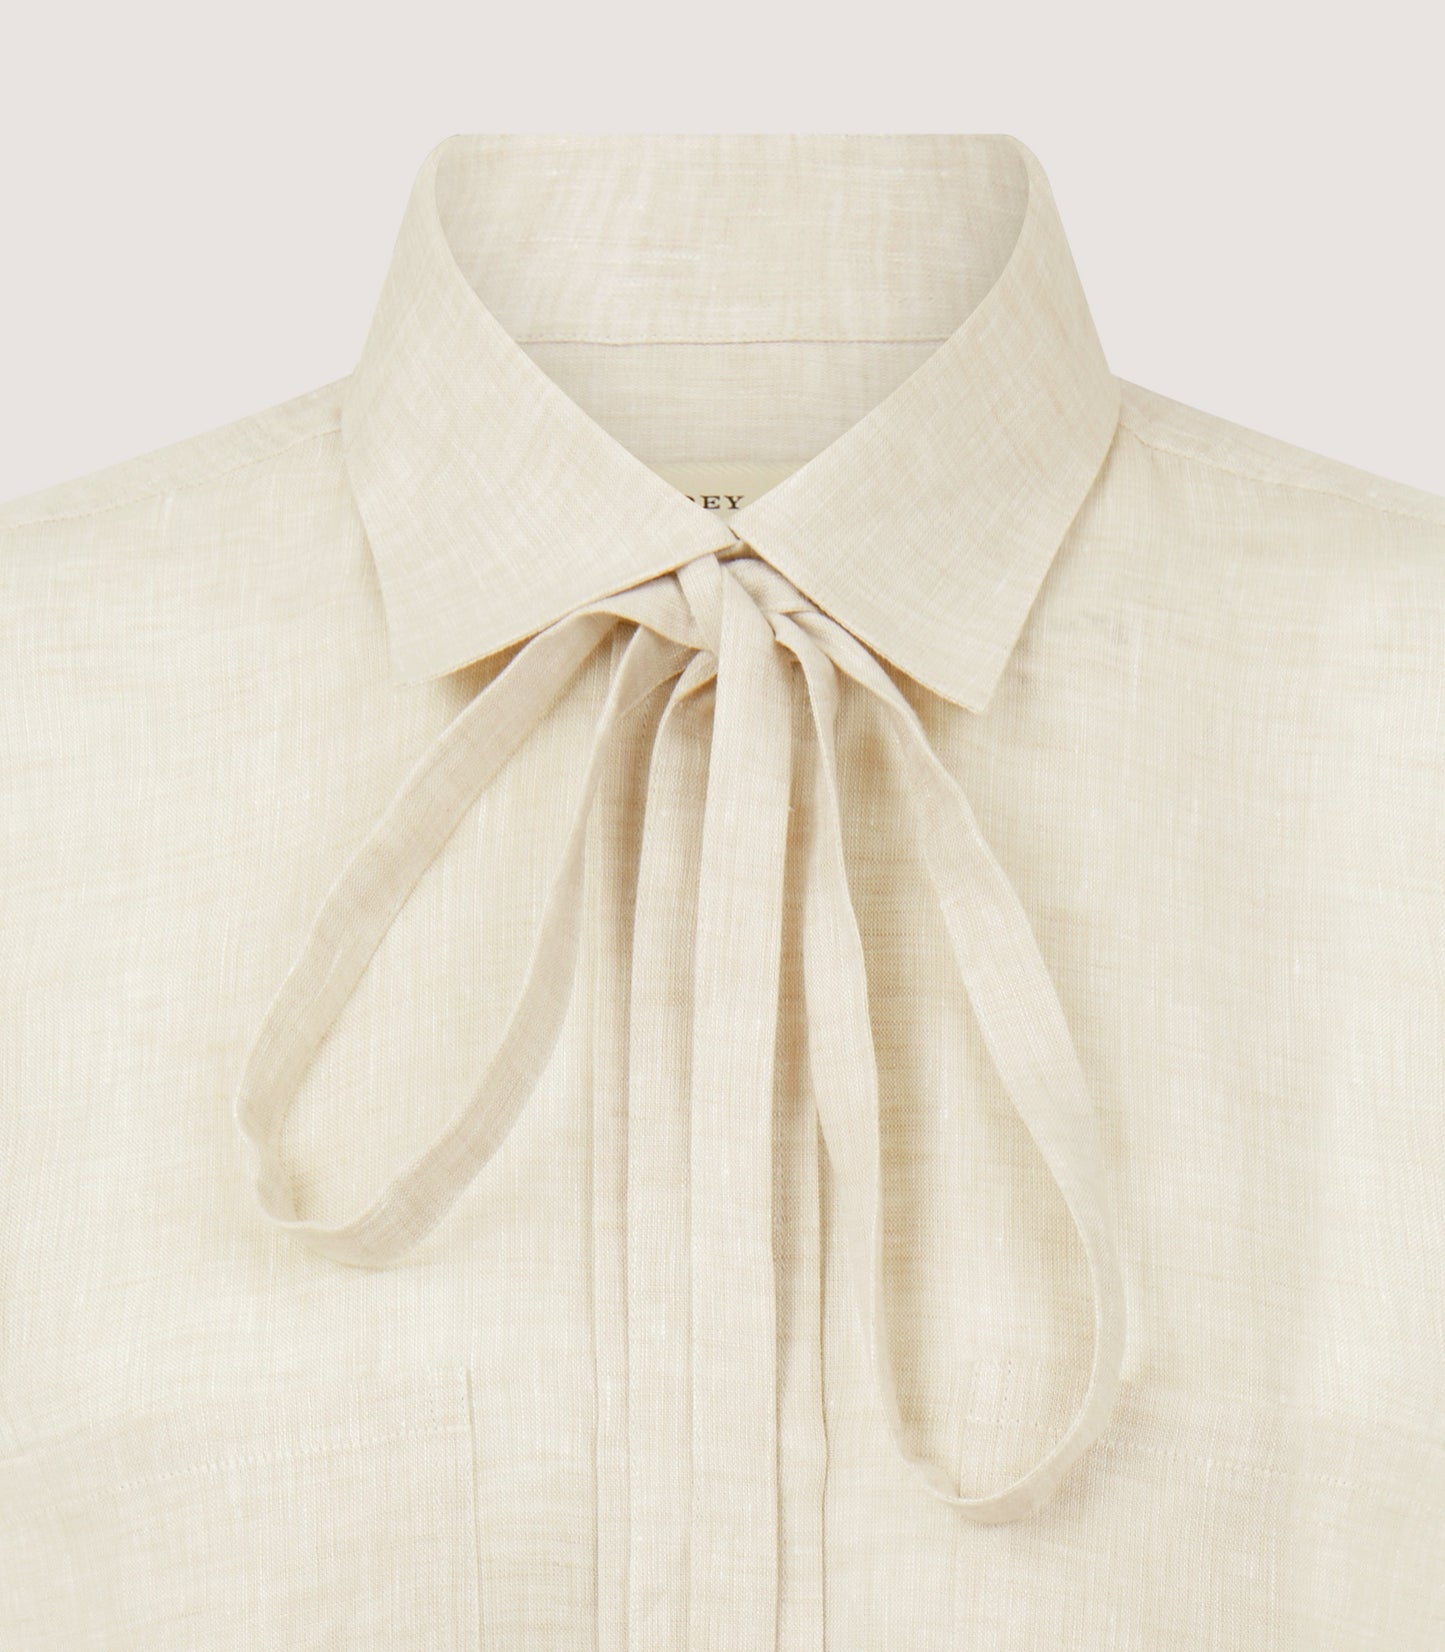 Women's Linen Relaxed Shirt in Pale Stone